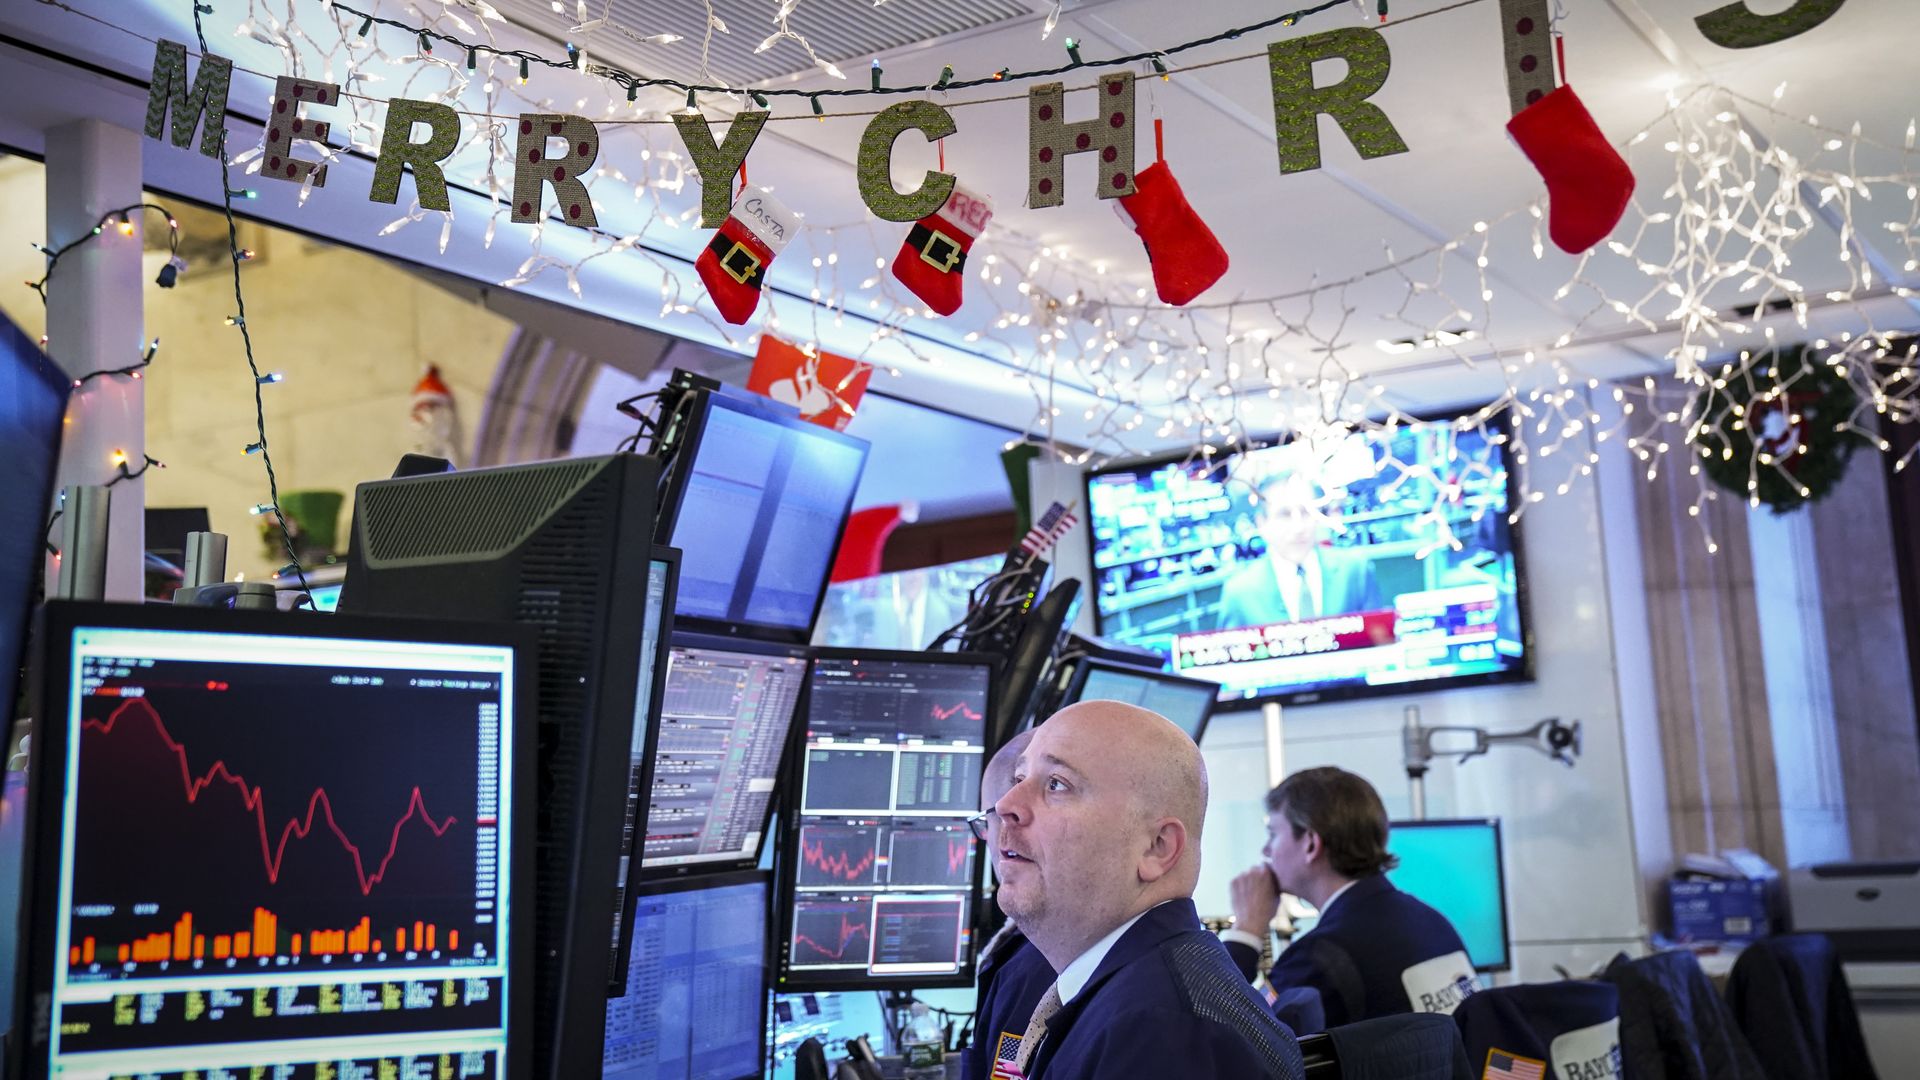 NEW YORK, NY - DECEMBER 14: Traders and financial professionals work at the opening bell on the floor of the New York Stock Exchange (NYSE), December 14, 2018 in New York City